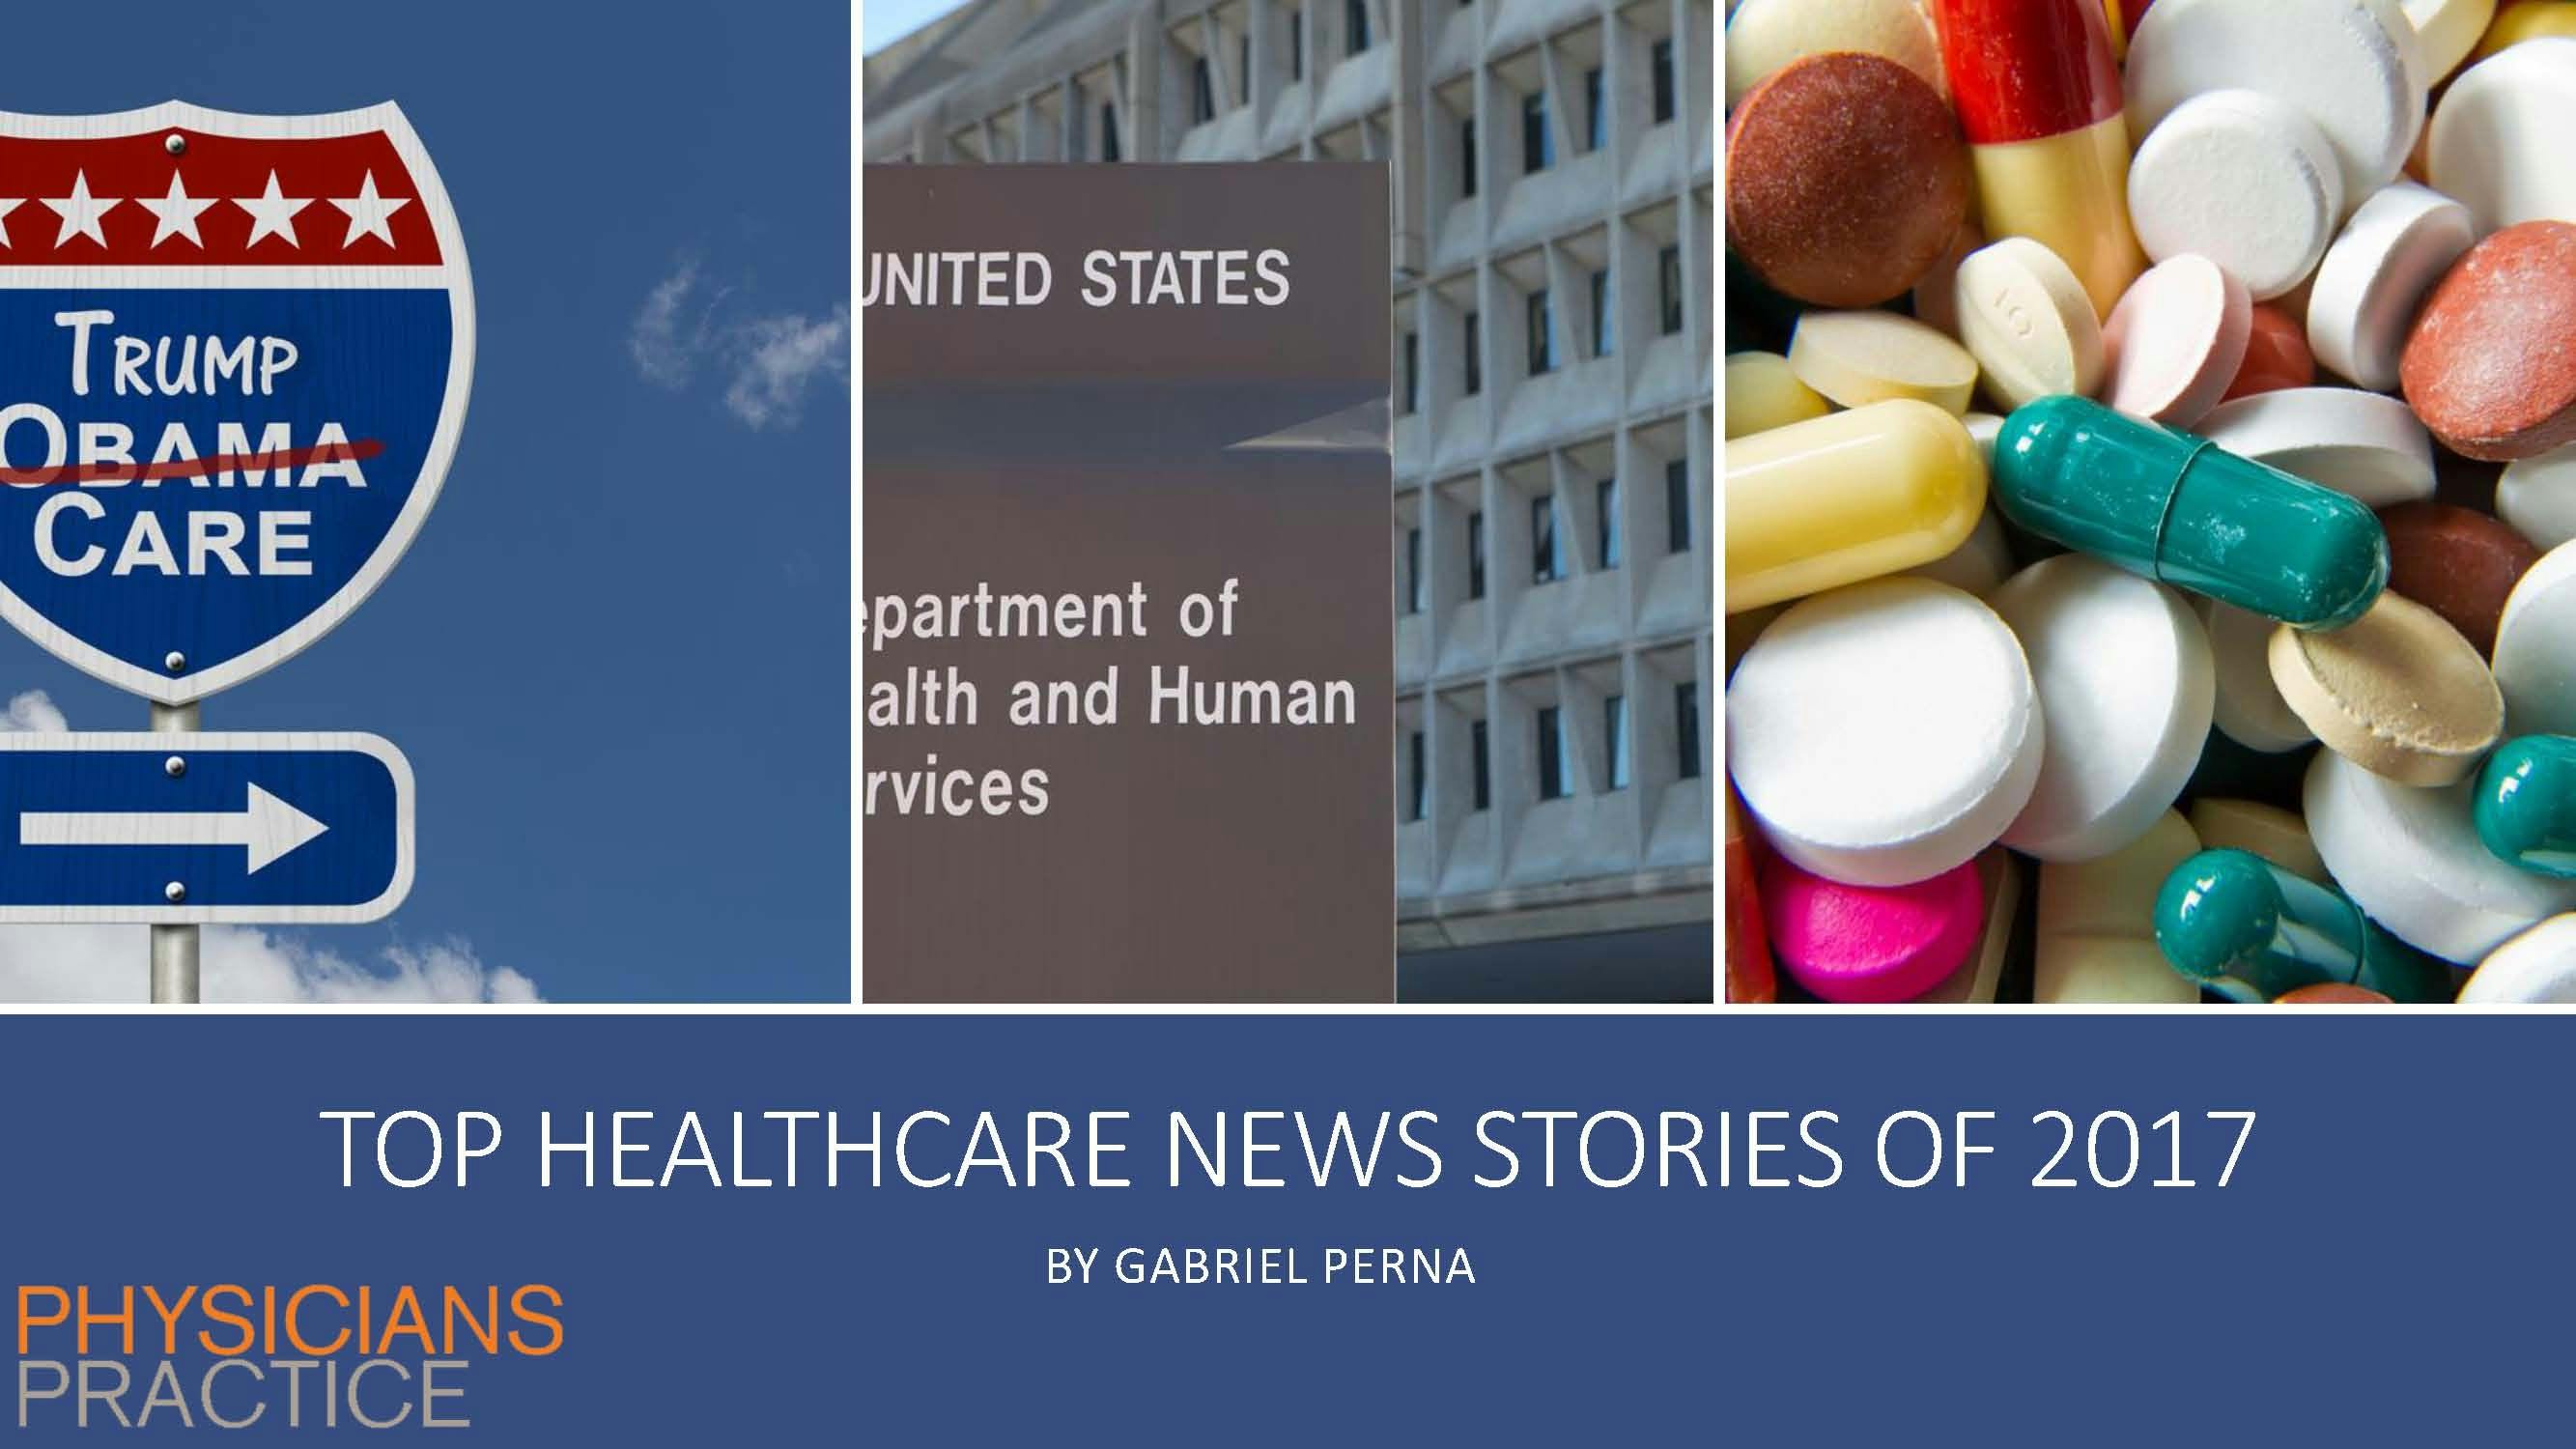 Top Healthcare News Stories of 2017